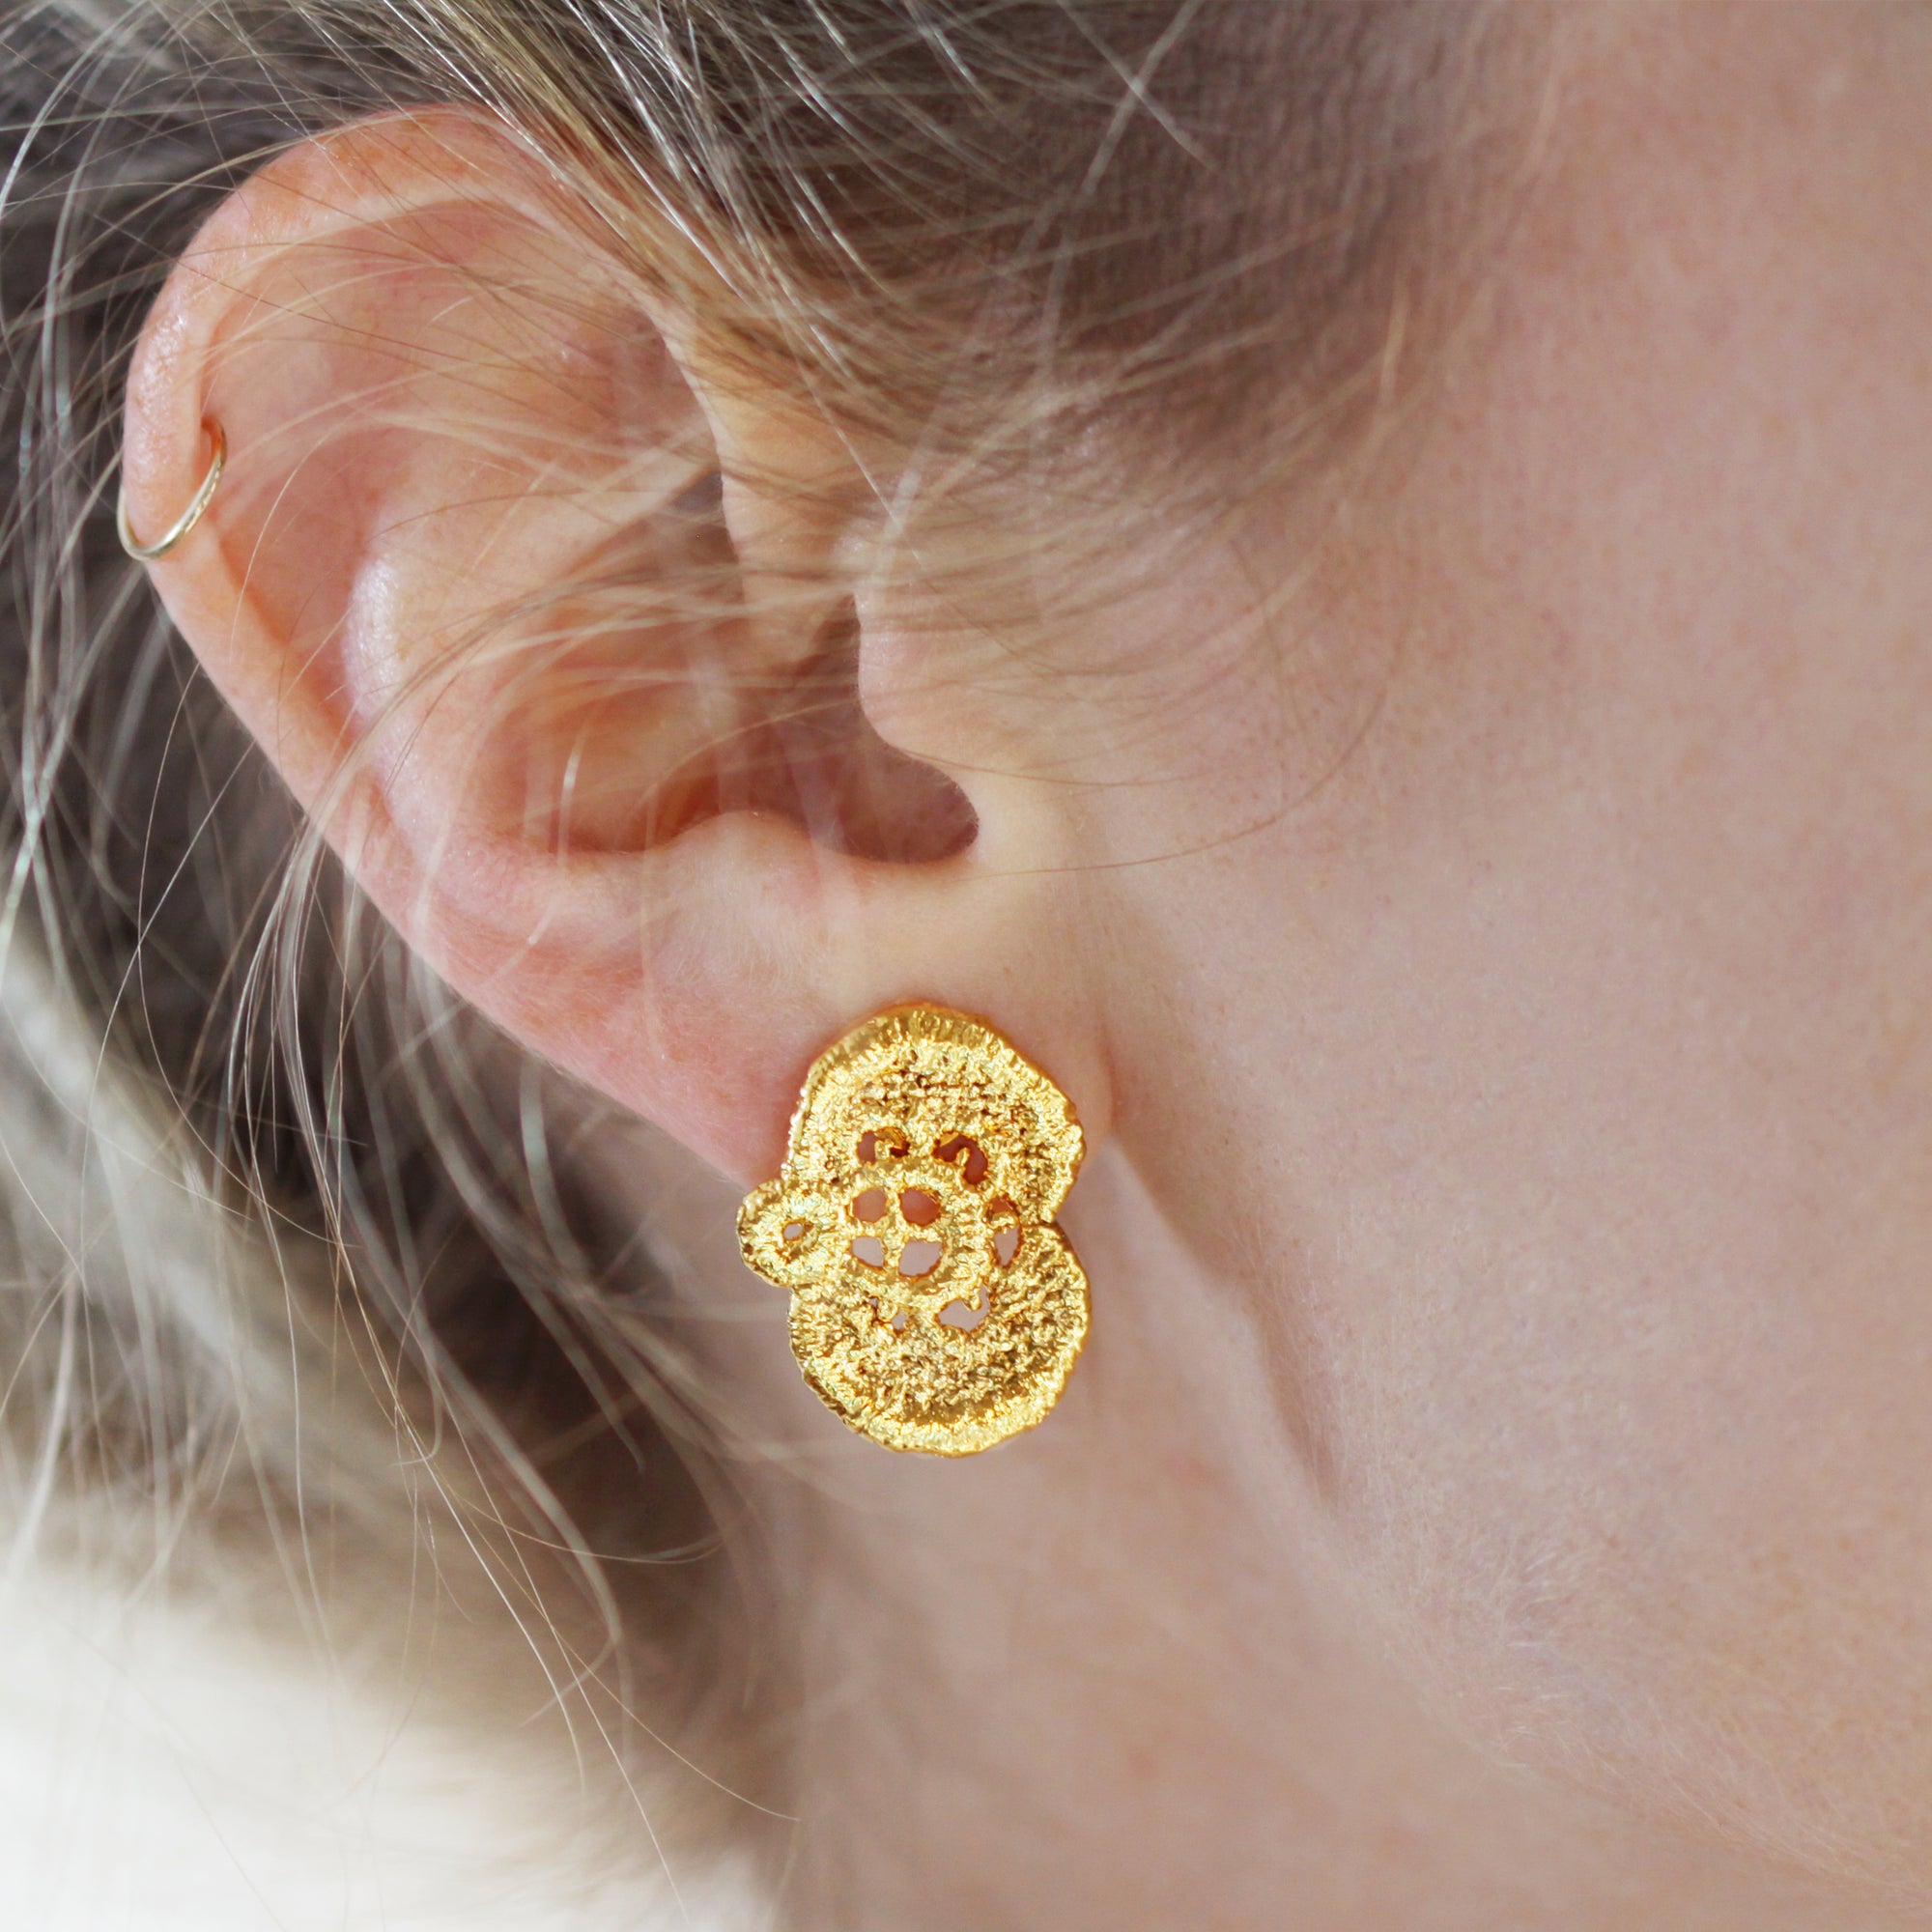 Sophisticated stud earrings made from lace dipped in 24k gold.